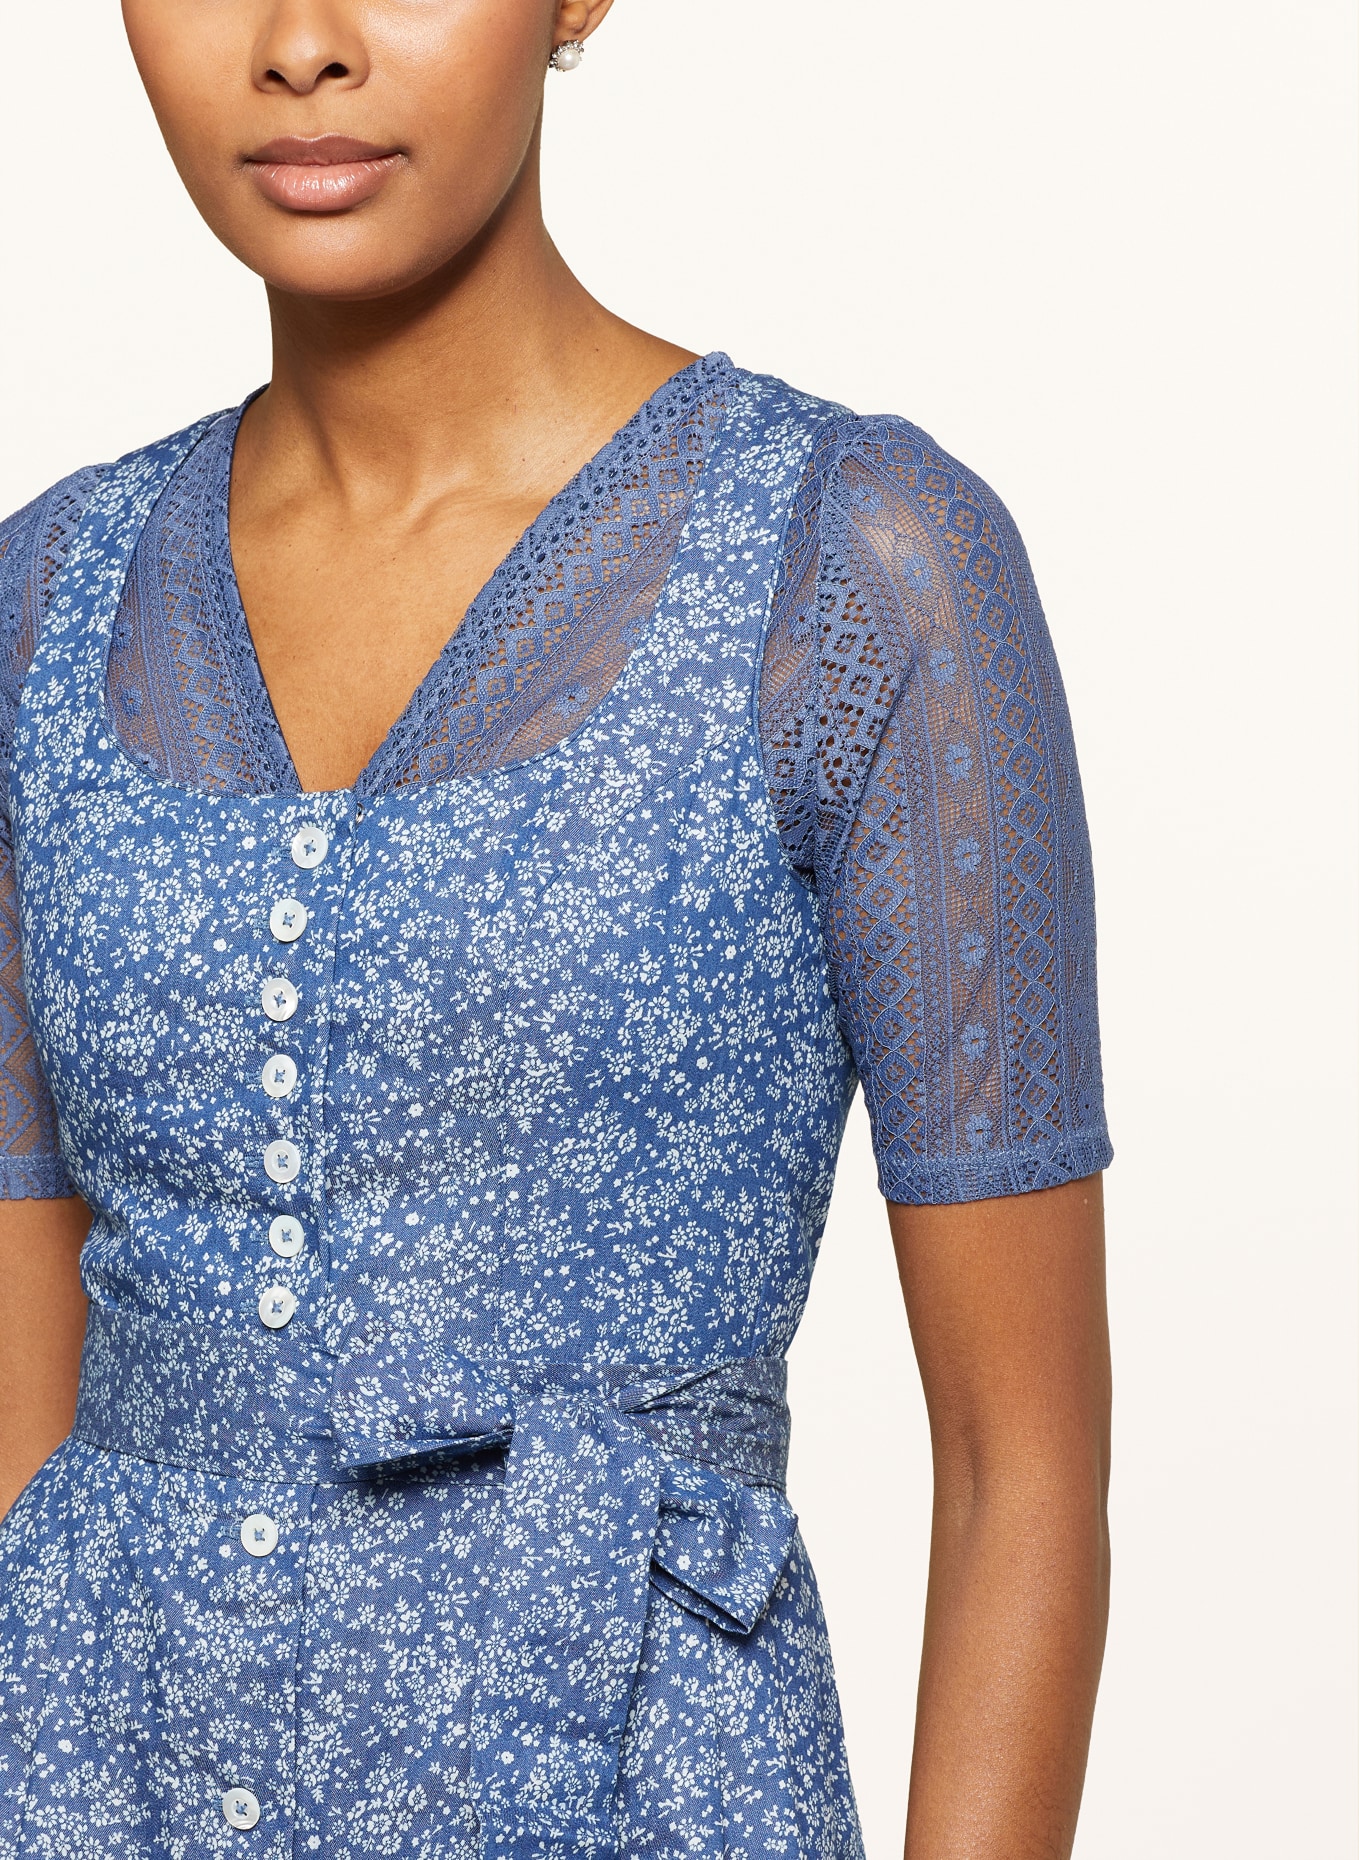 BERWIN & WOLFF Dirndl blouse made of lace, Color: BLUE (Image 3)